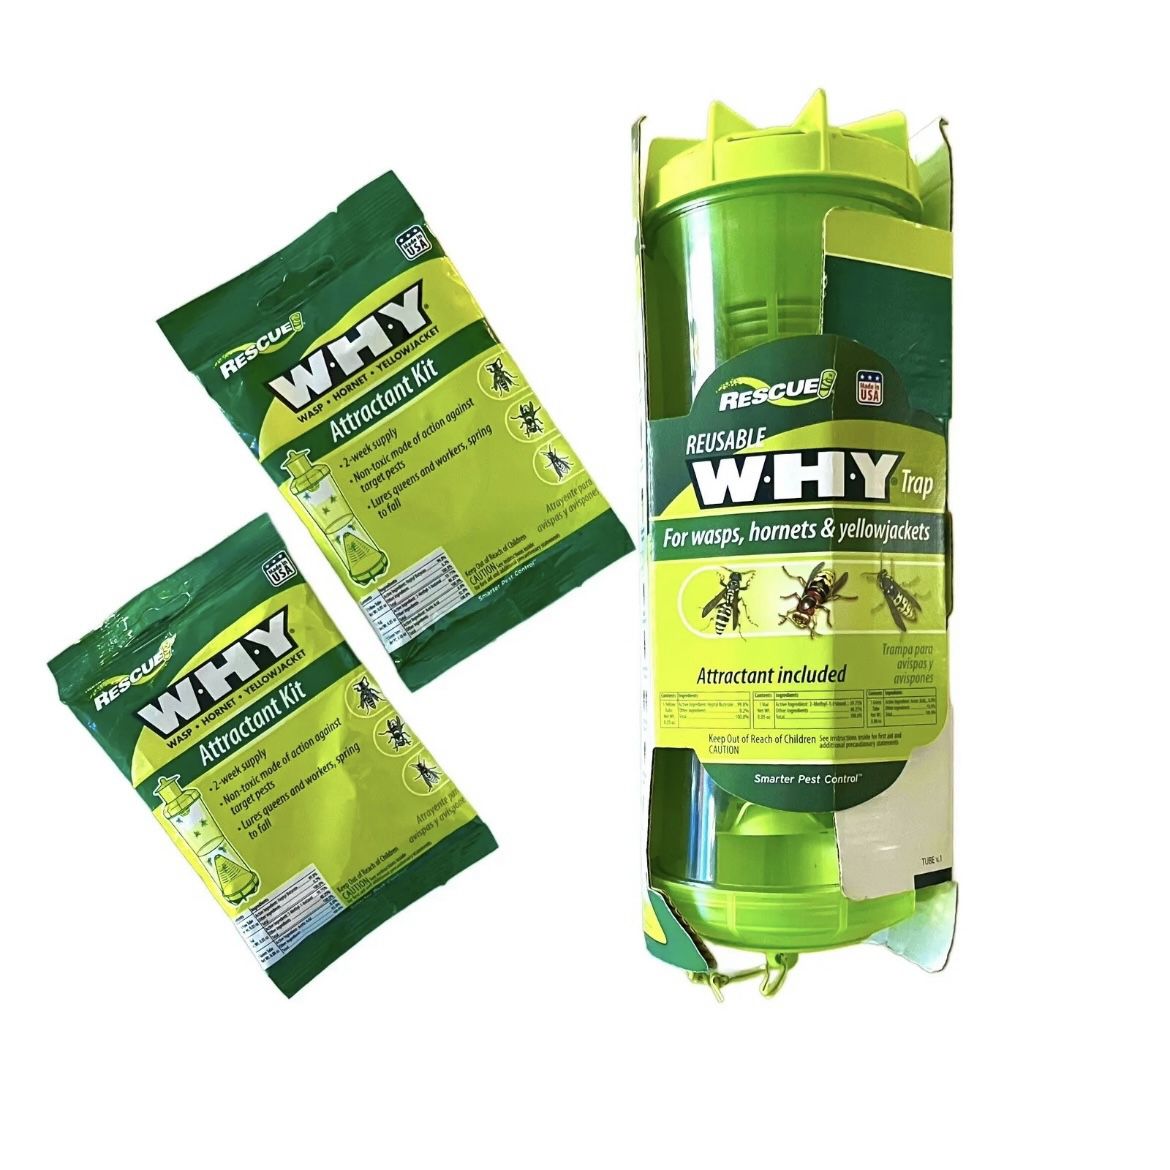 RESCUE! WHY Trap Wasps, Hornets, Yellowjackets Hanging Outdoor Trap + Attractant